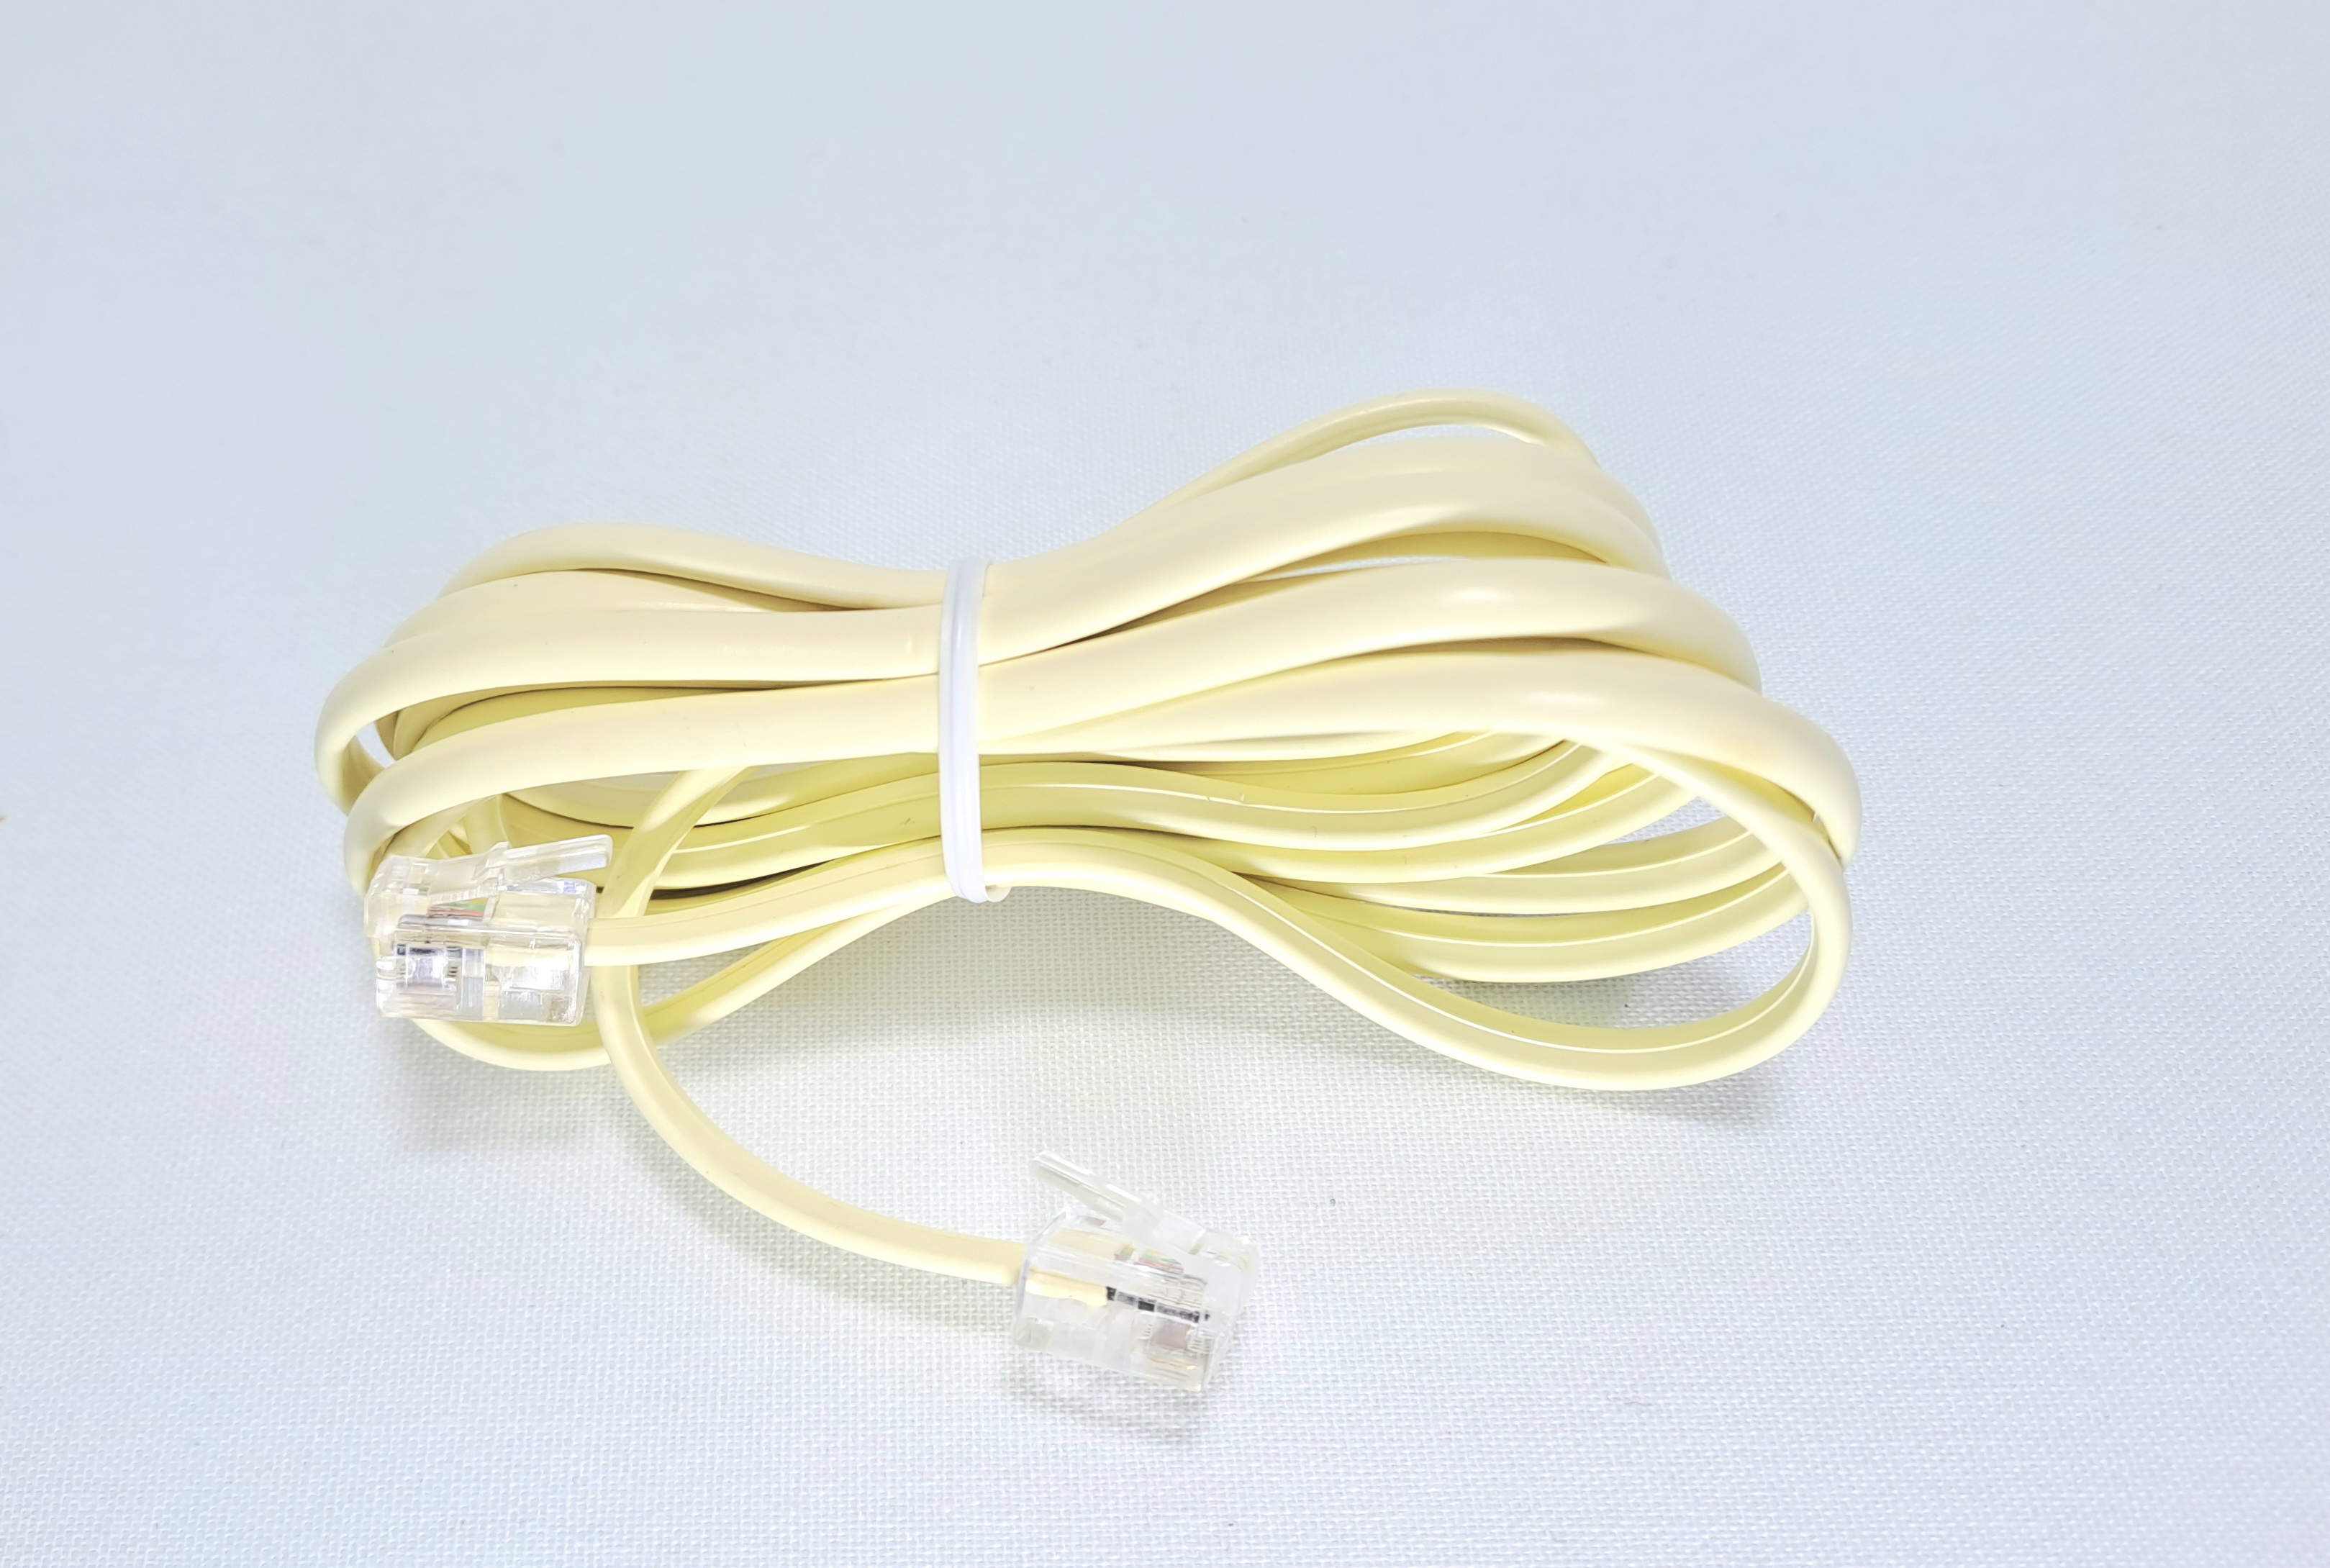 Assembly 4 Core Telephone Cable with RJ11 6P4C Connectors 1.8m (Beige)